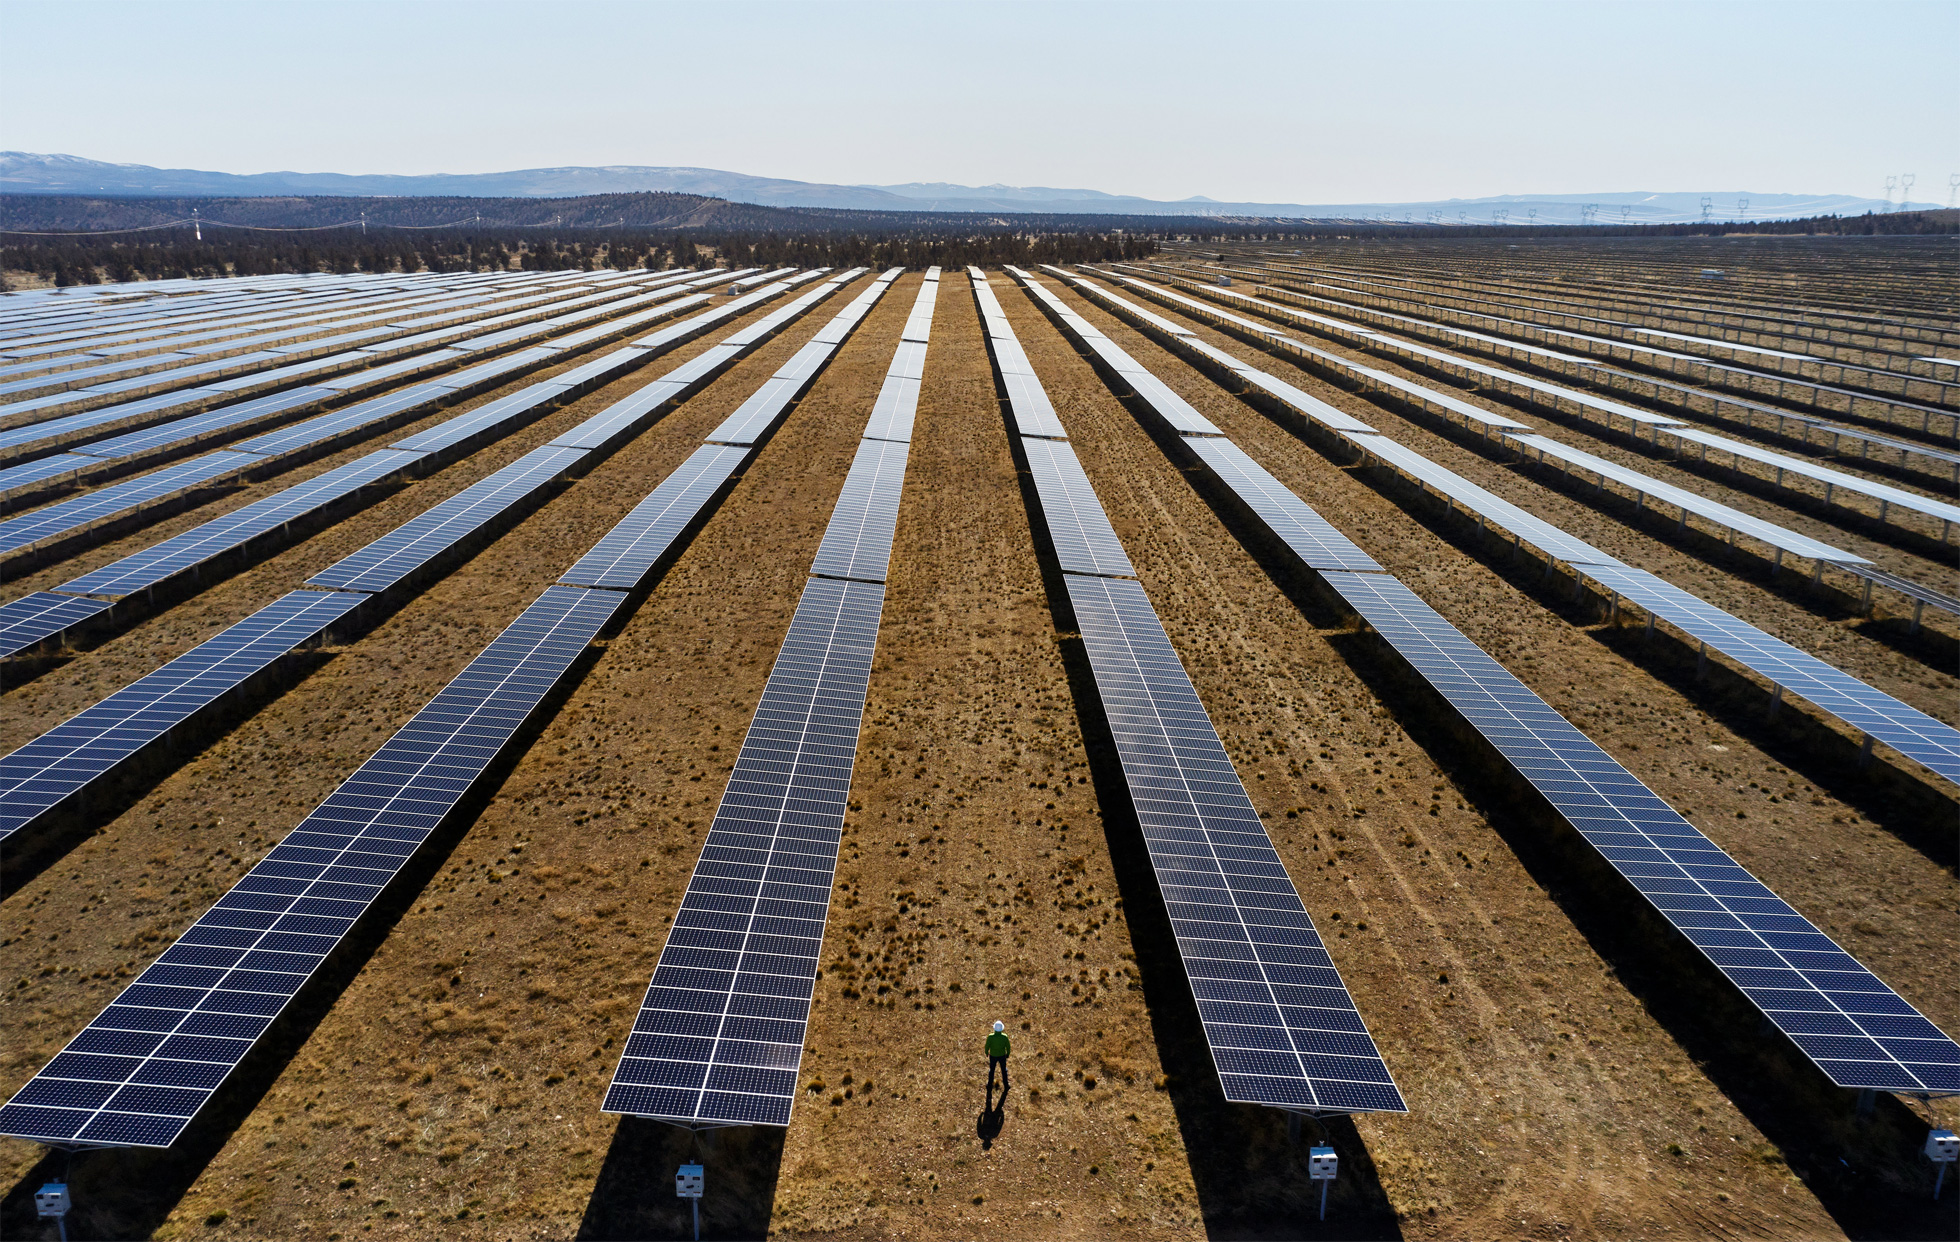 Apple_commits-100-percent-carbon-neutrality-for-supply-chain-and-products-by-2030-solar-farm_07212020_big.jpg.large_2x.jpg